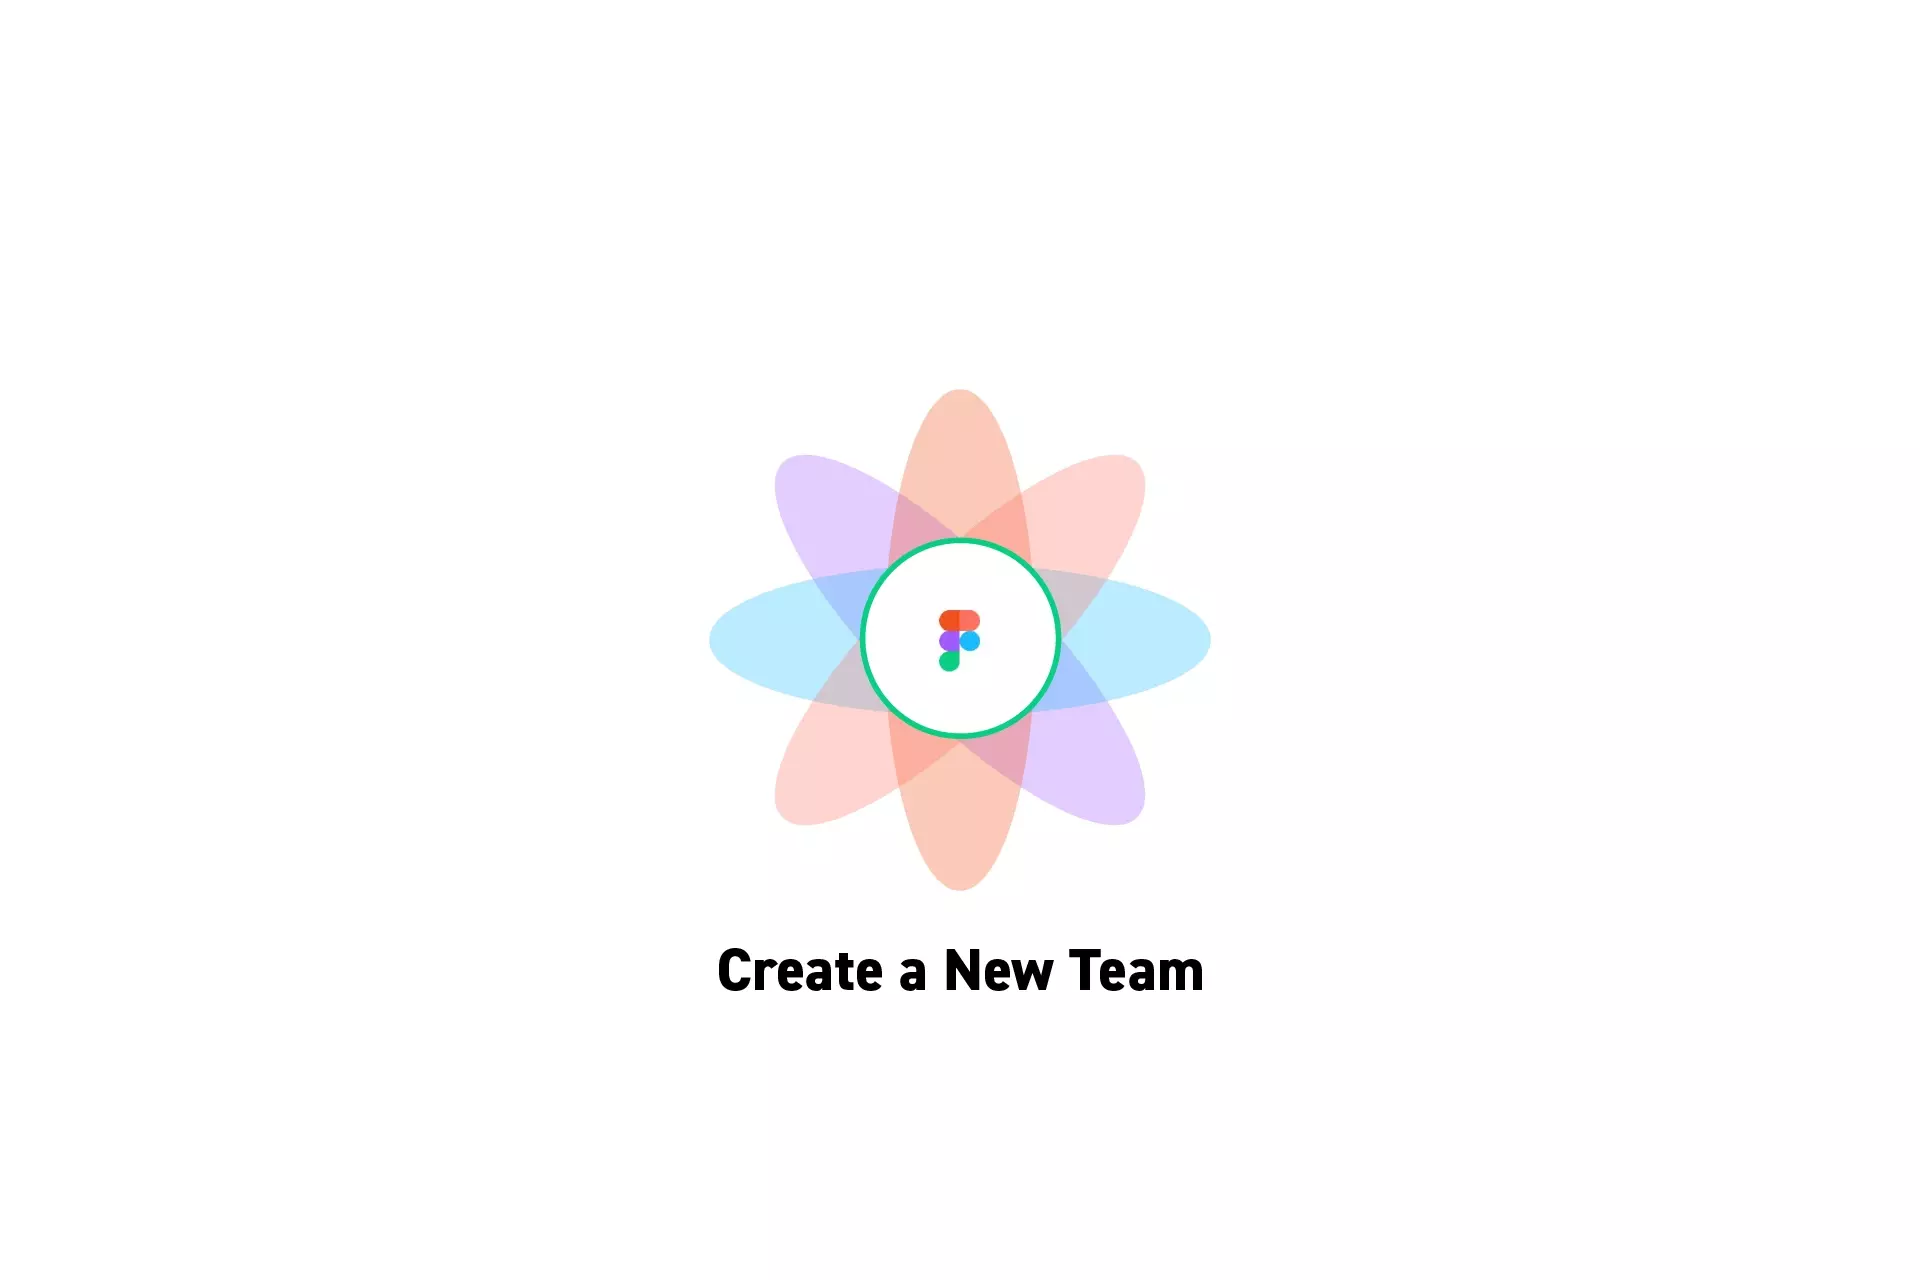 A flower that represents Figma with the text "Create a New Team" beneath it.